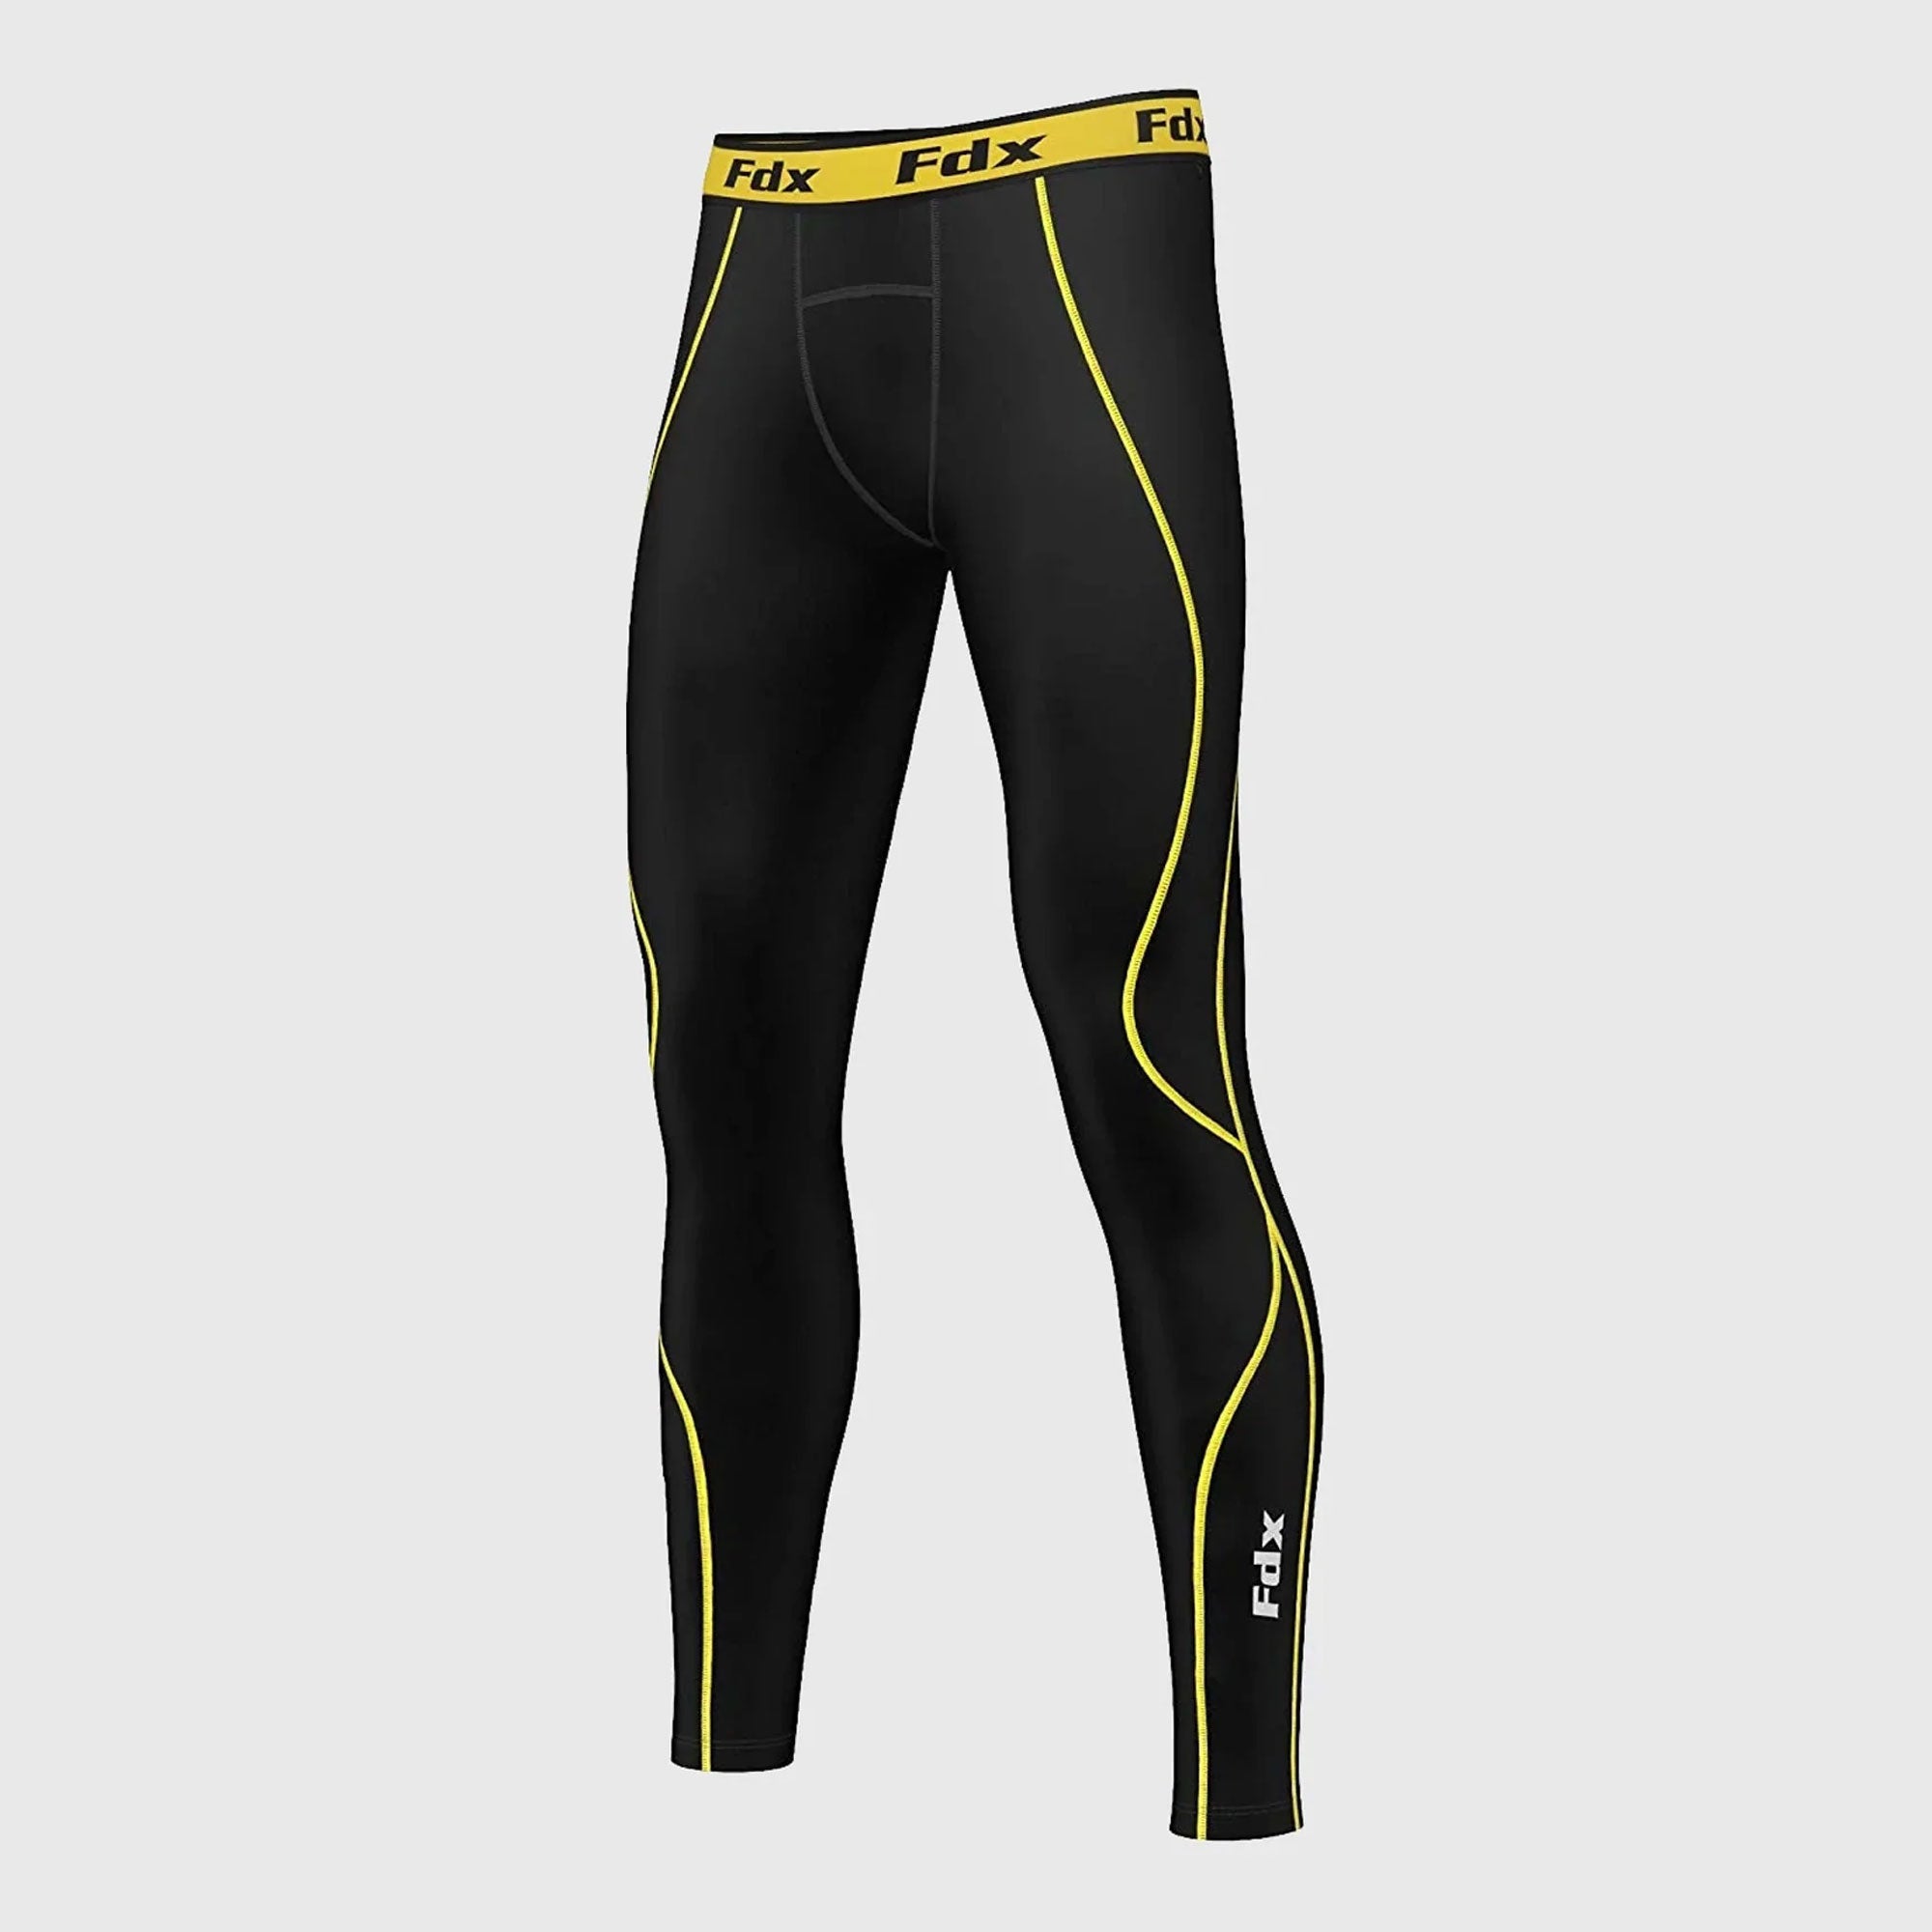 Fdx Black & Yellow Compression Tights Leggings Gym Workout Running Athletic Yoga Elastic Waistband Strechable Breathable Training Jogging Pants - Blitz